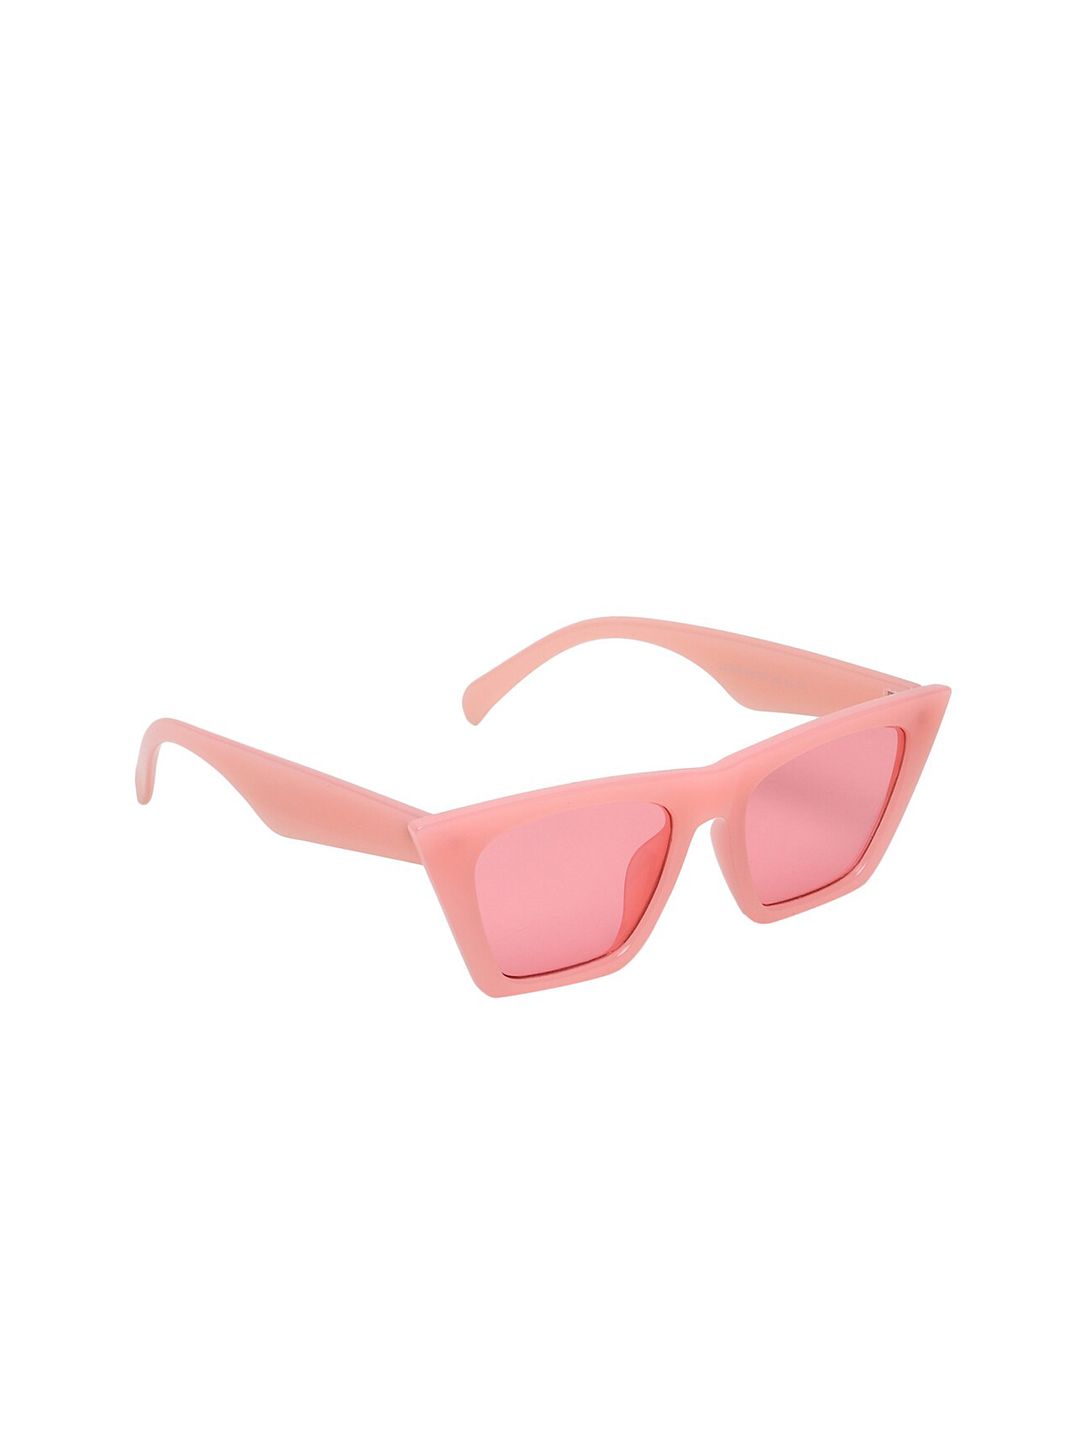 CRIBA Unisex Pink Lens & Pink Cateye Sunglasses with UV Protected Lens Price in India